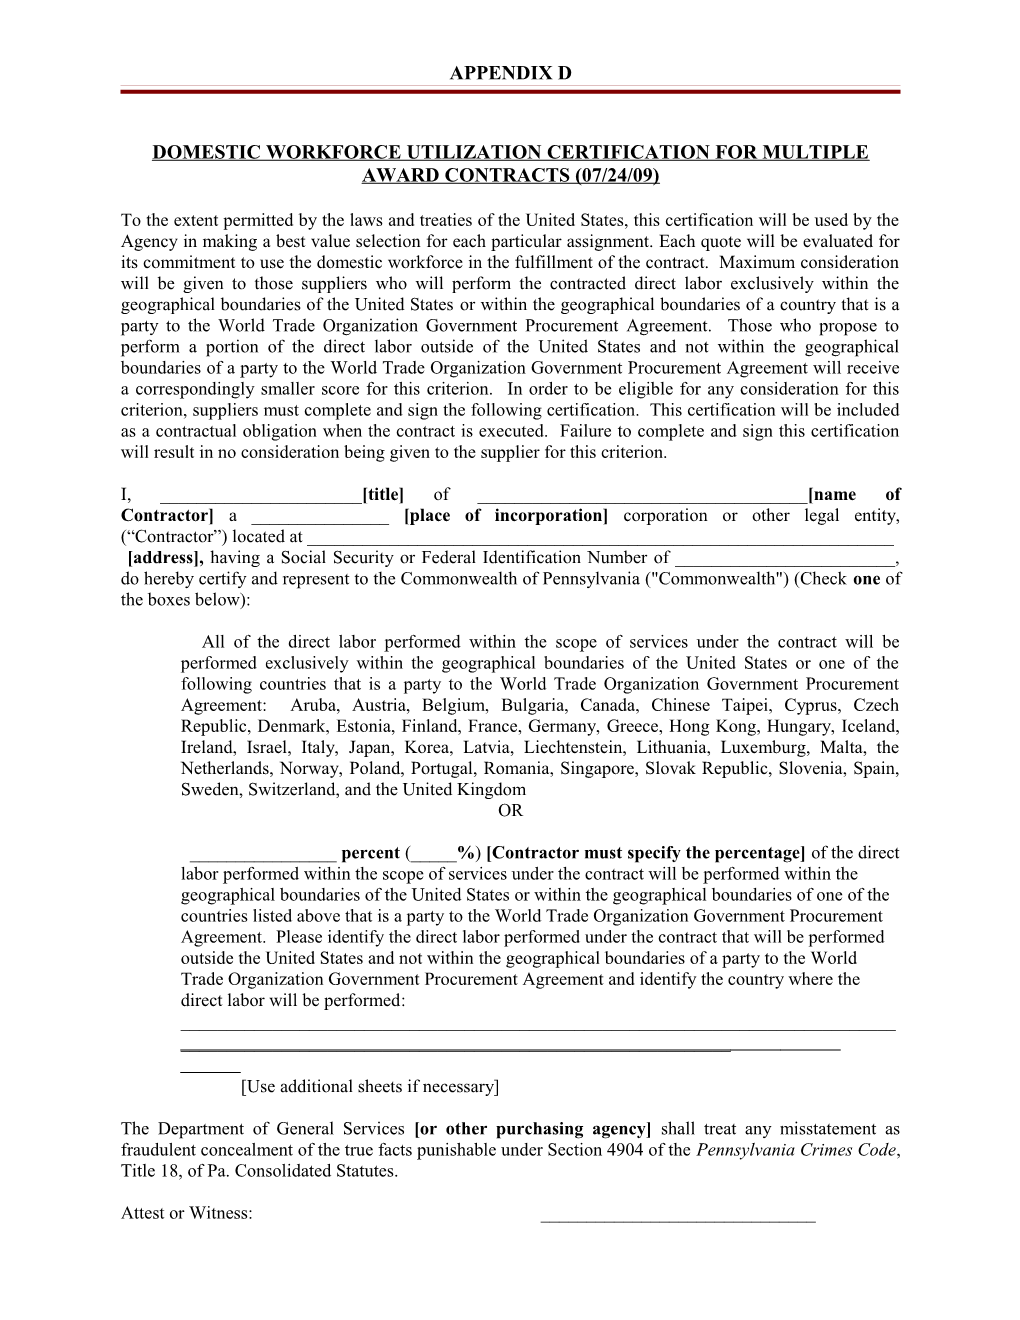 Domestic Workforce Utilization Certification for Multiple Award Contracts (07/24/09)